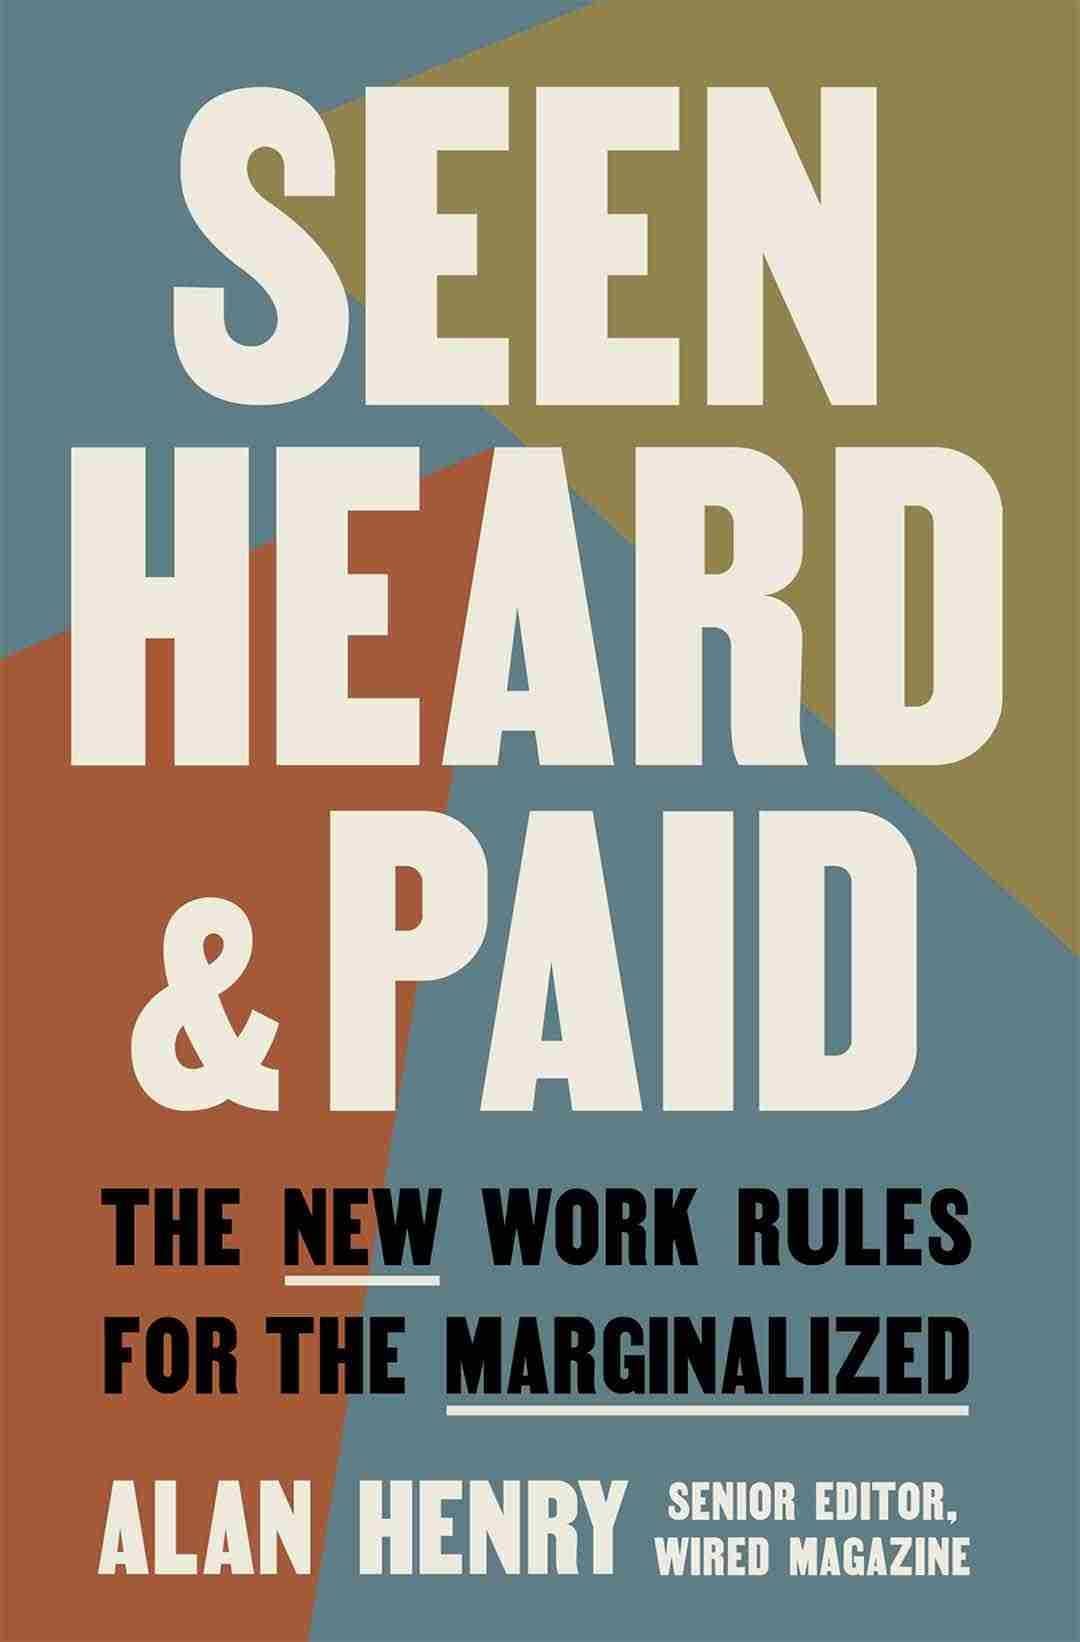 "Seen, Heard & Paid: The New Work Rules for the Marginalized" book cover